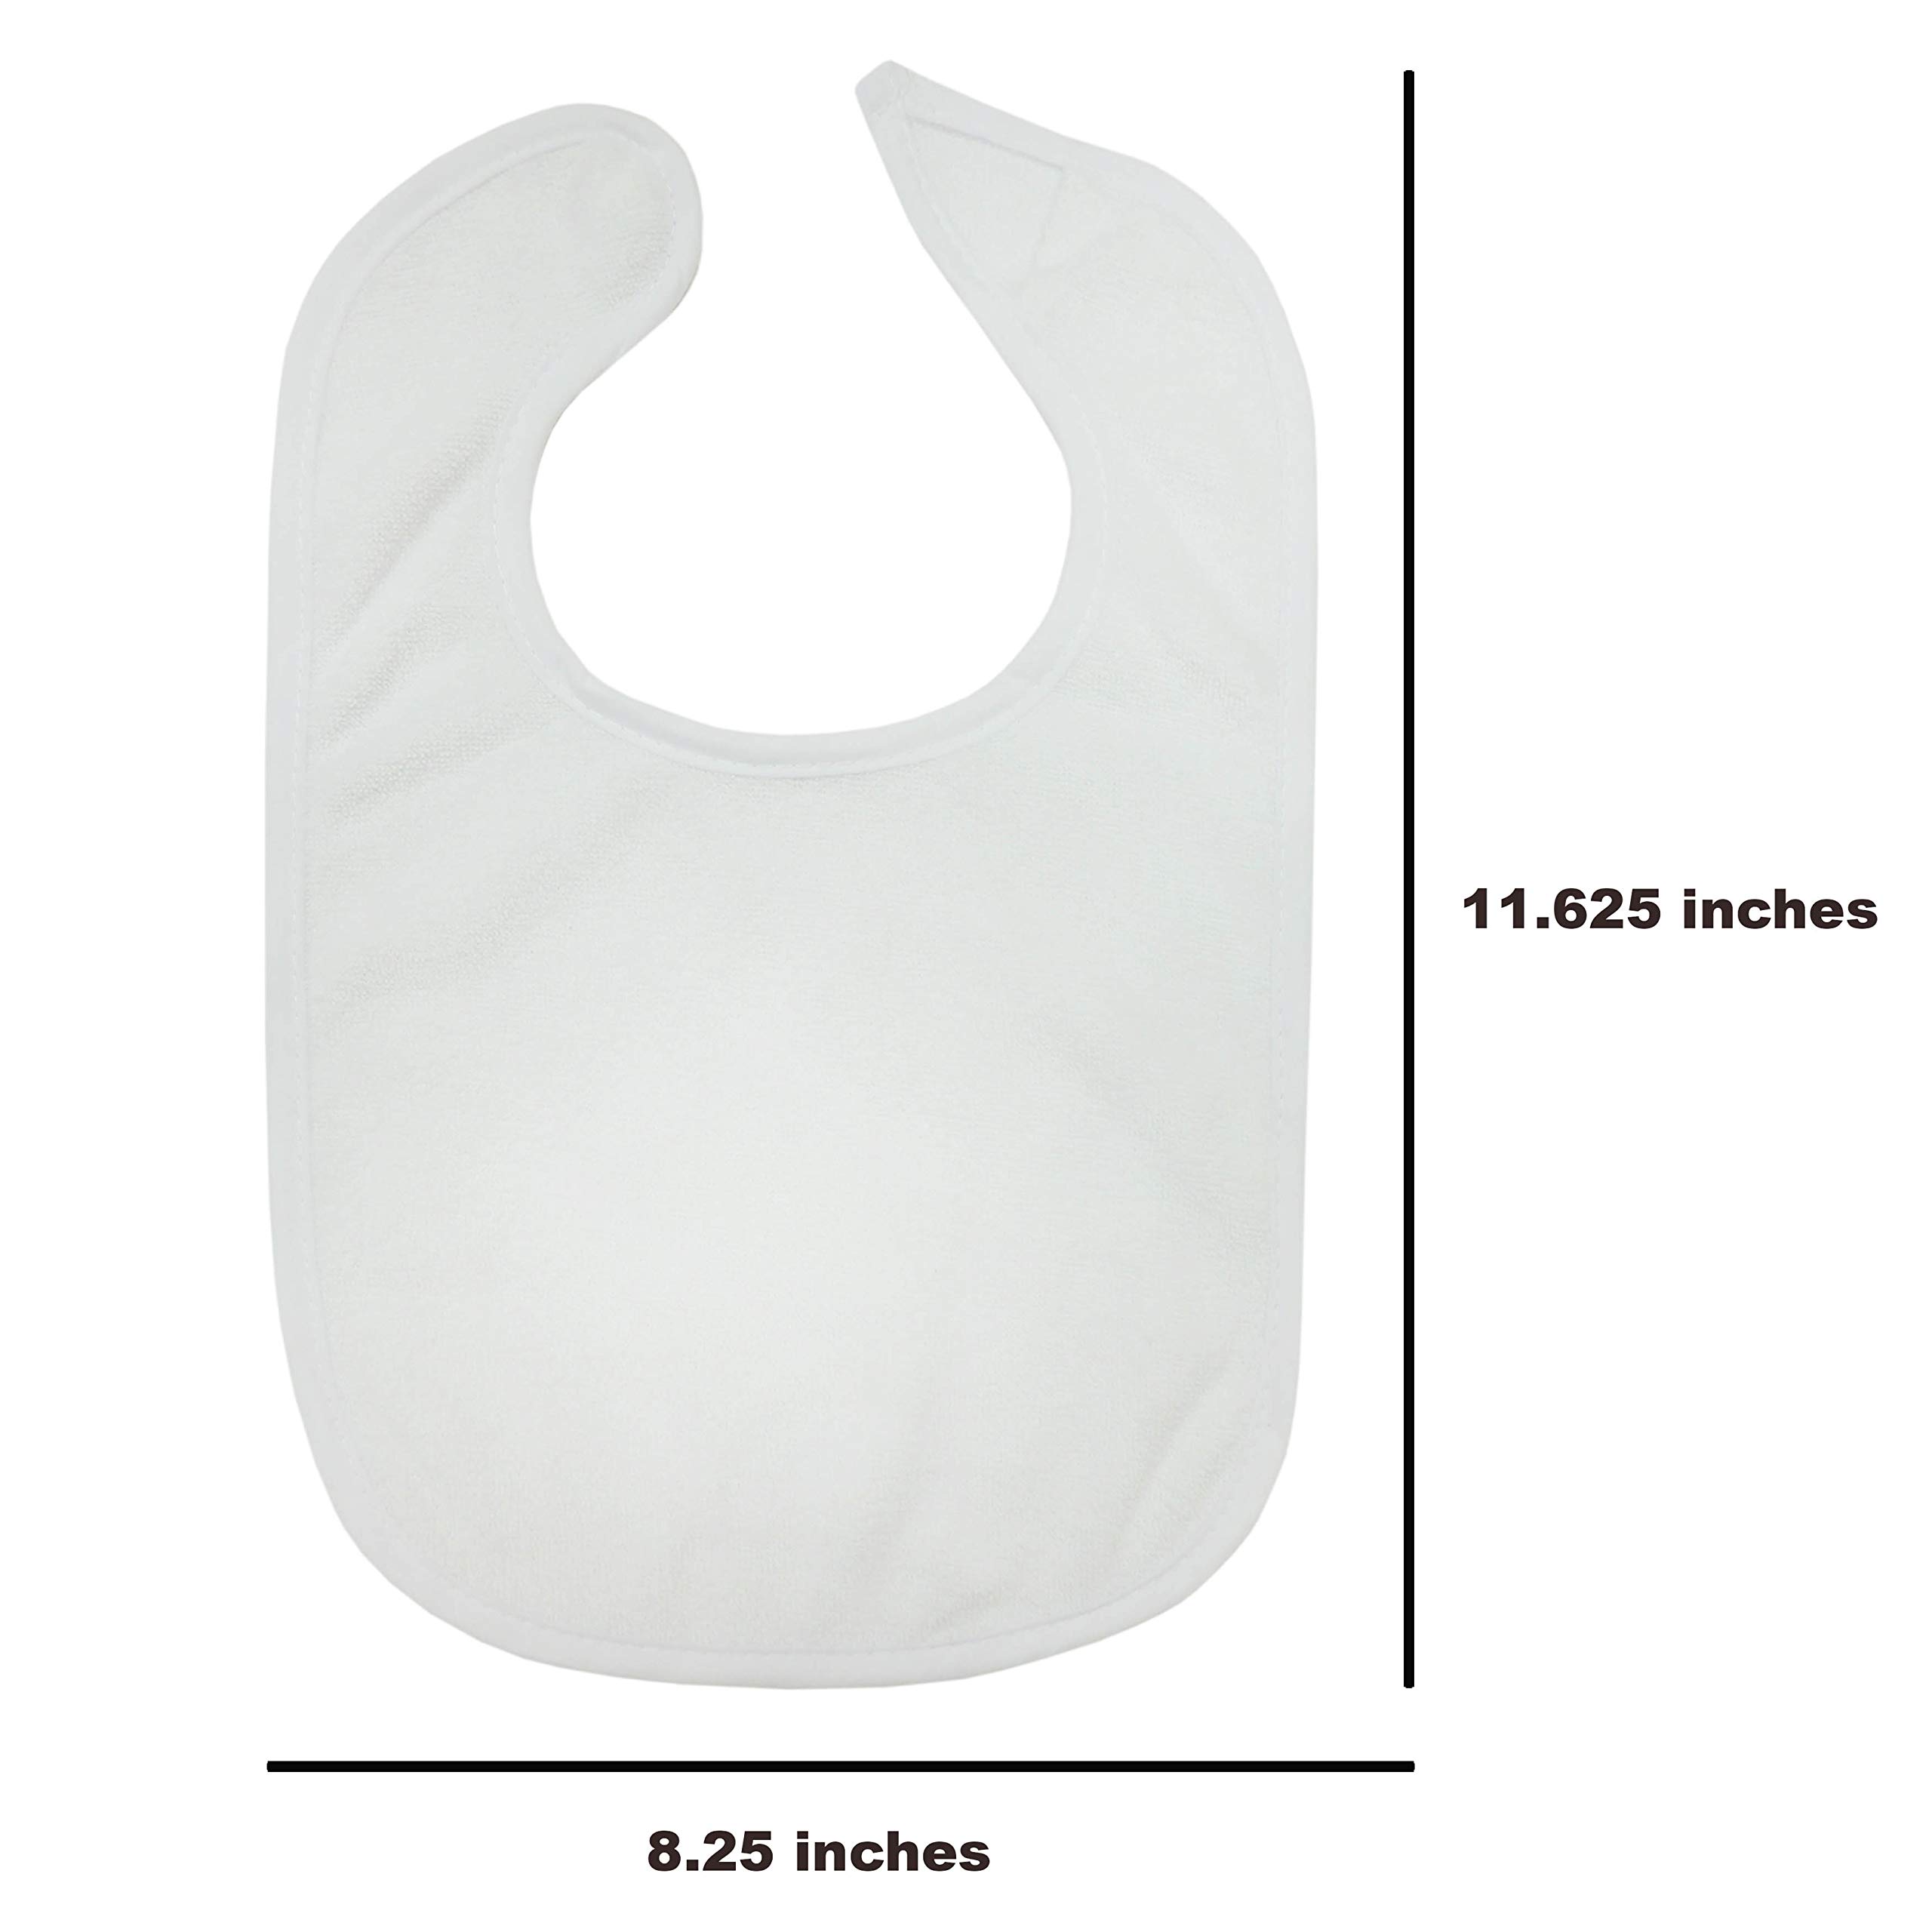 Neat Solutions 2-Ply Knit Terry Solid Color Feeder Bibs in White - 20 Pack